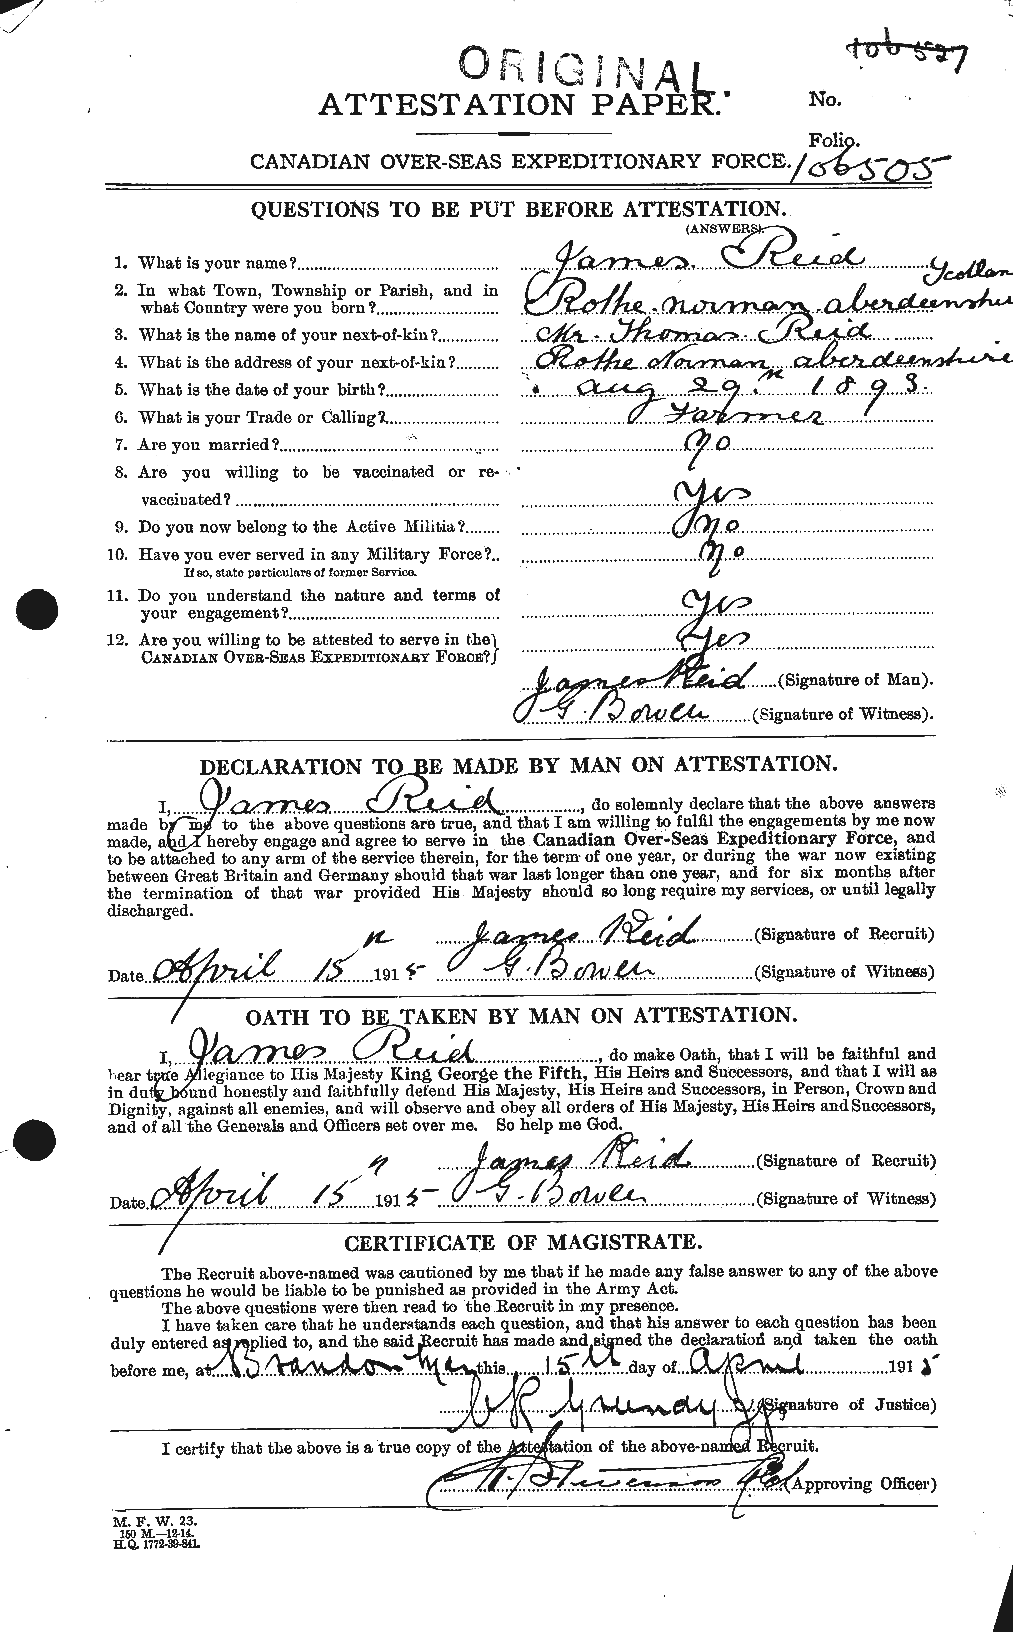 Personnel Records of the First World War - CEF 598647a